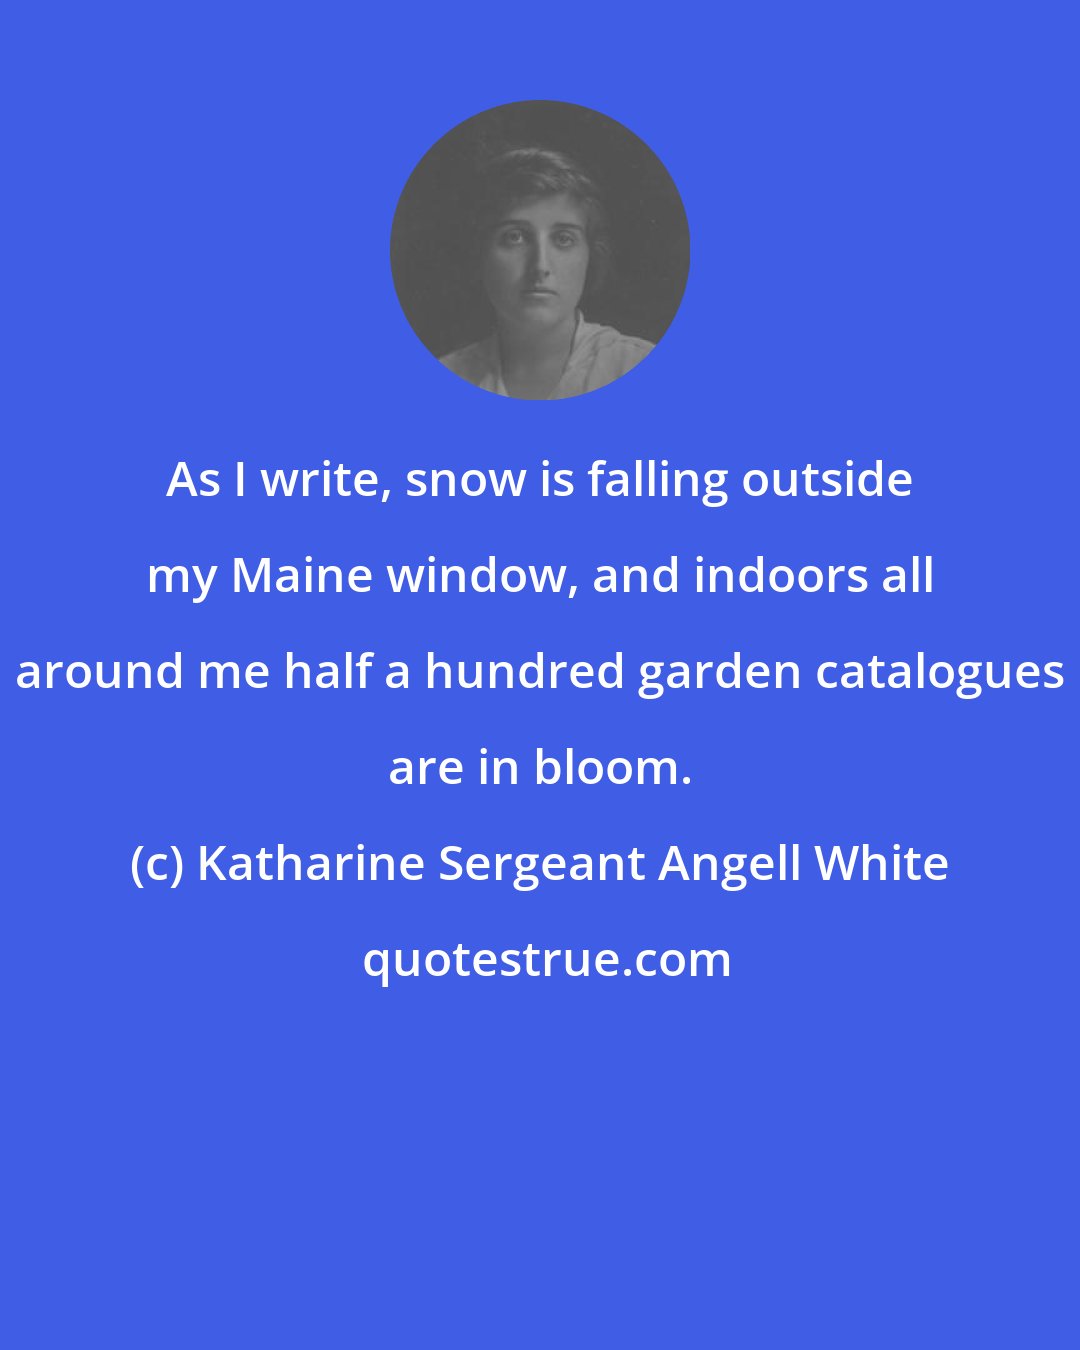 Katharine Sergeant Angell White: As I write, snow is falling outside my Maine window, and indoors all around me half a hundred garden catalogues are in bloom.